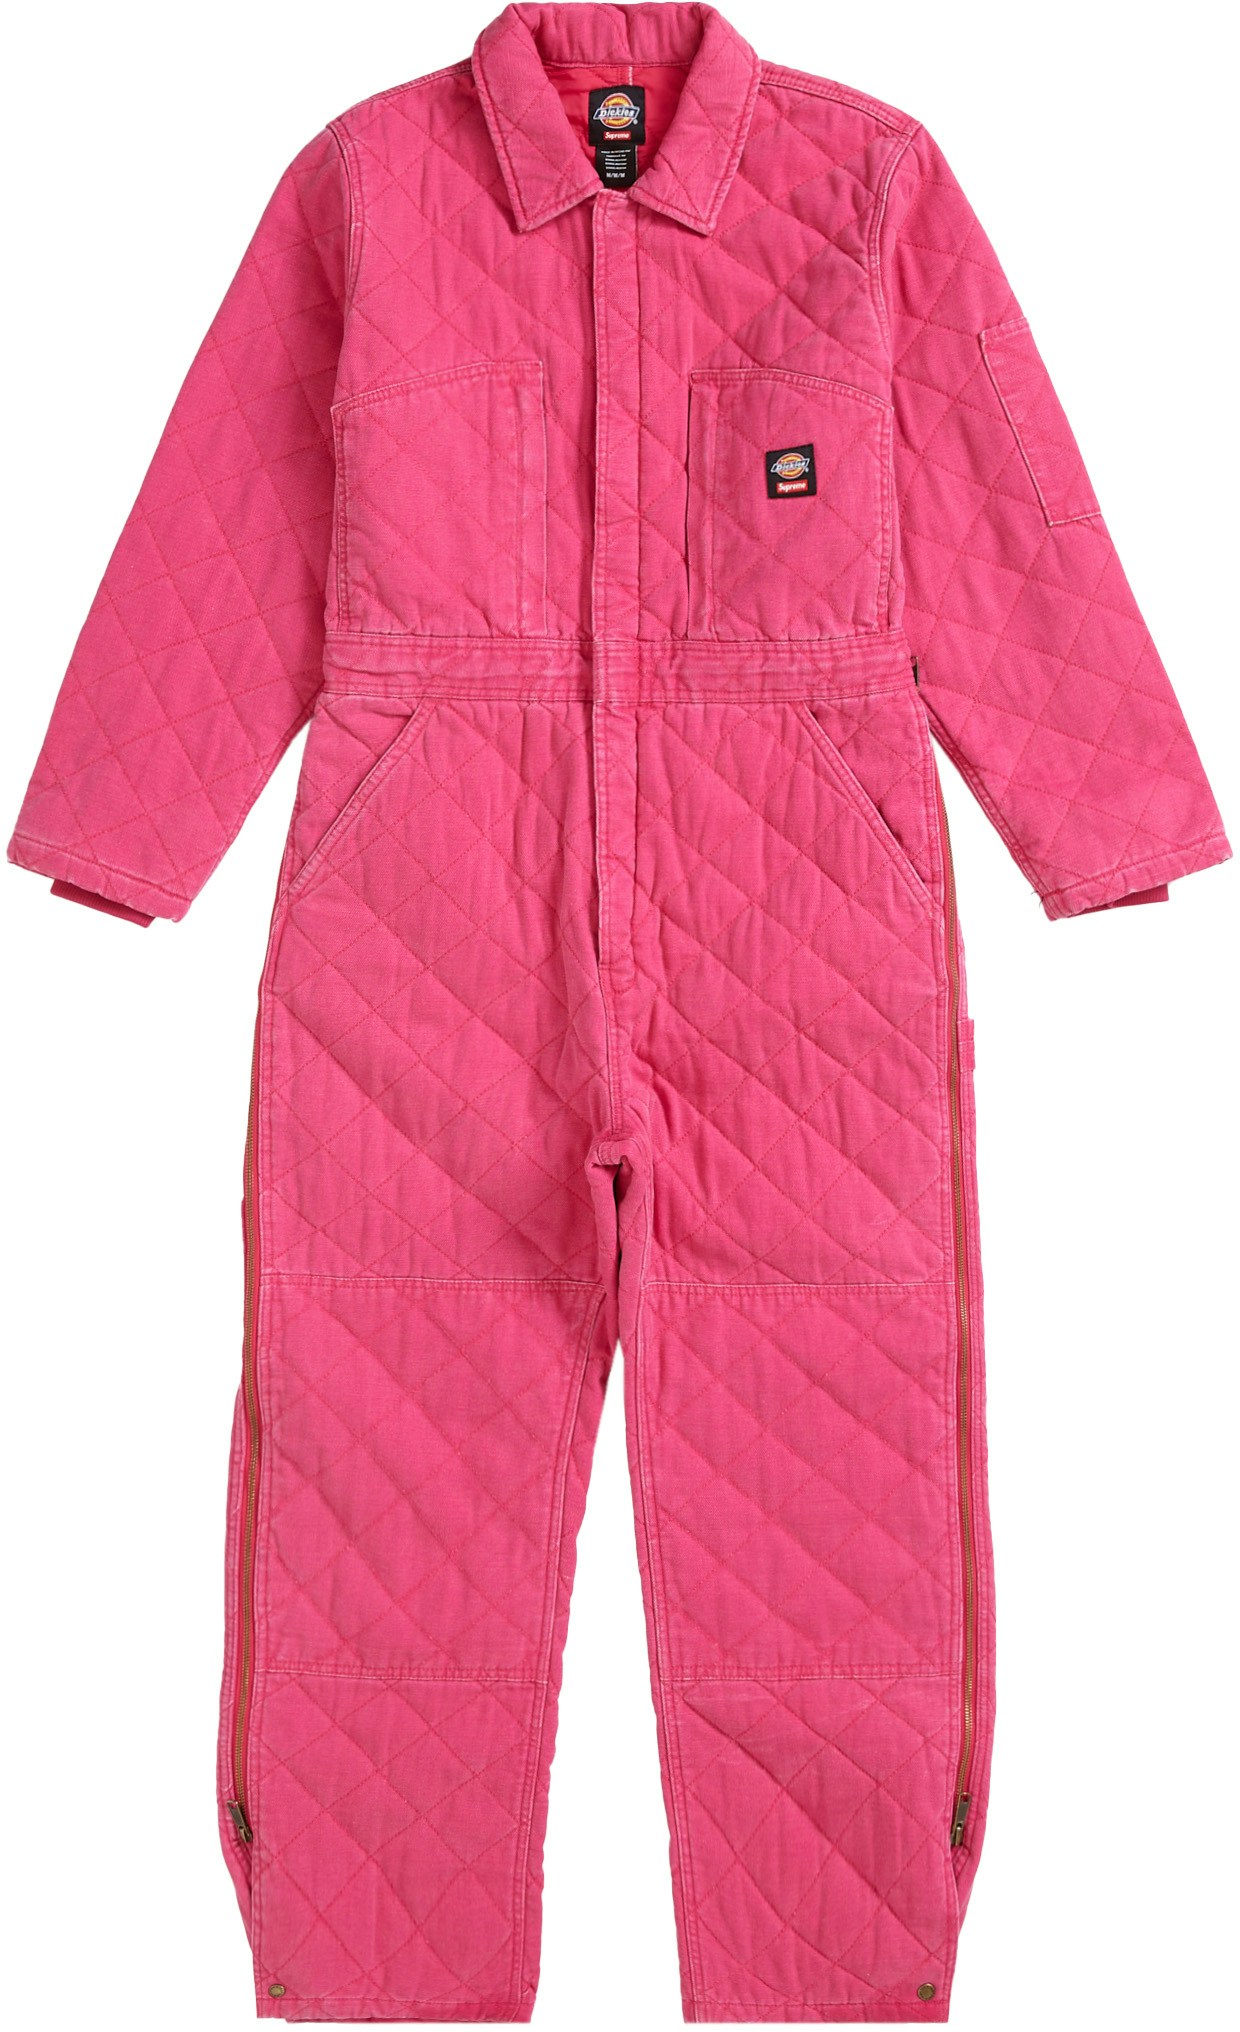 Supreme x Dickies Quilted Denim Coverall Pink